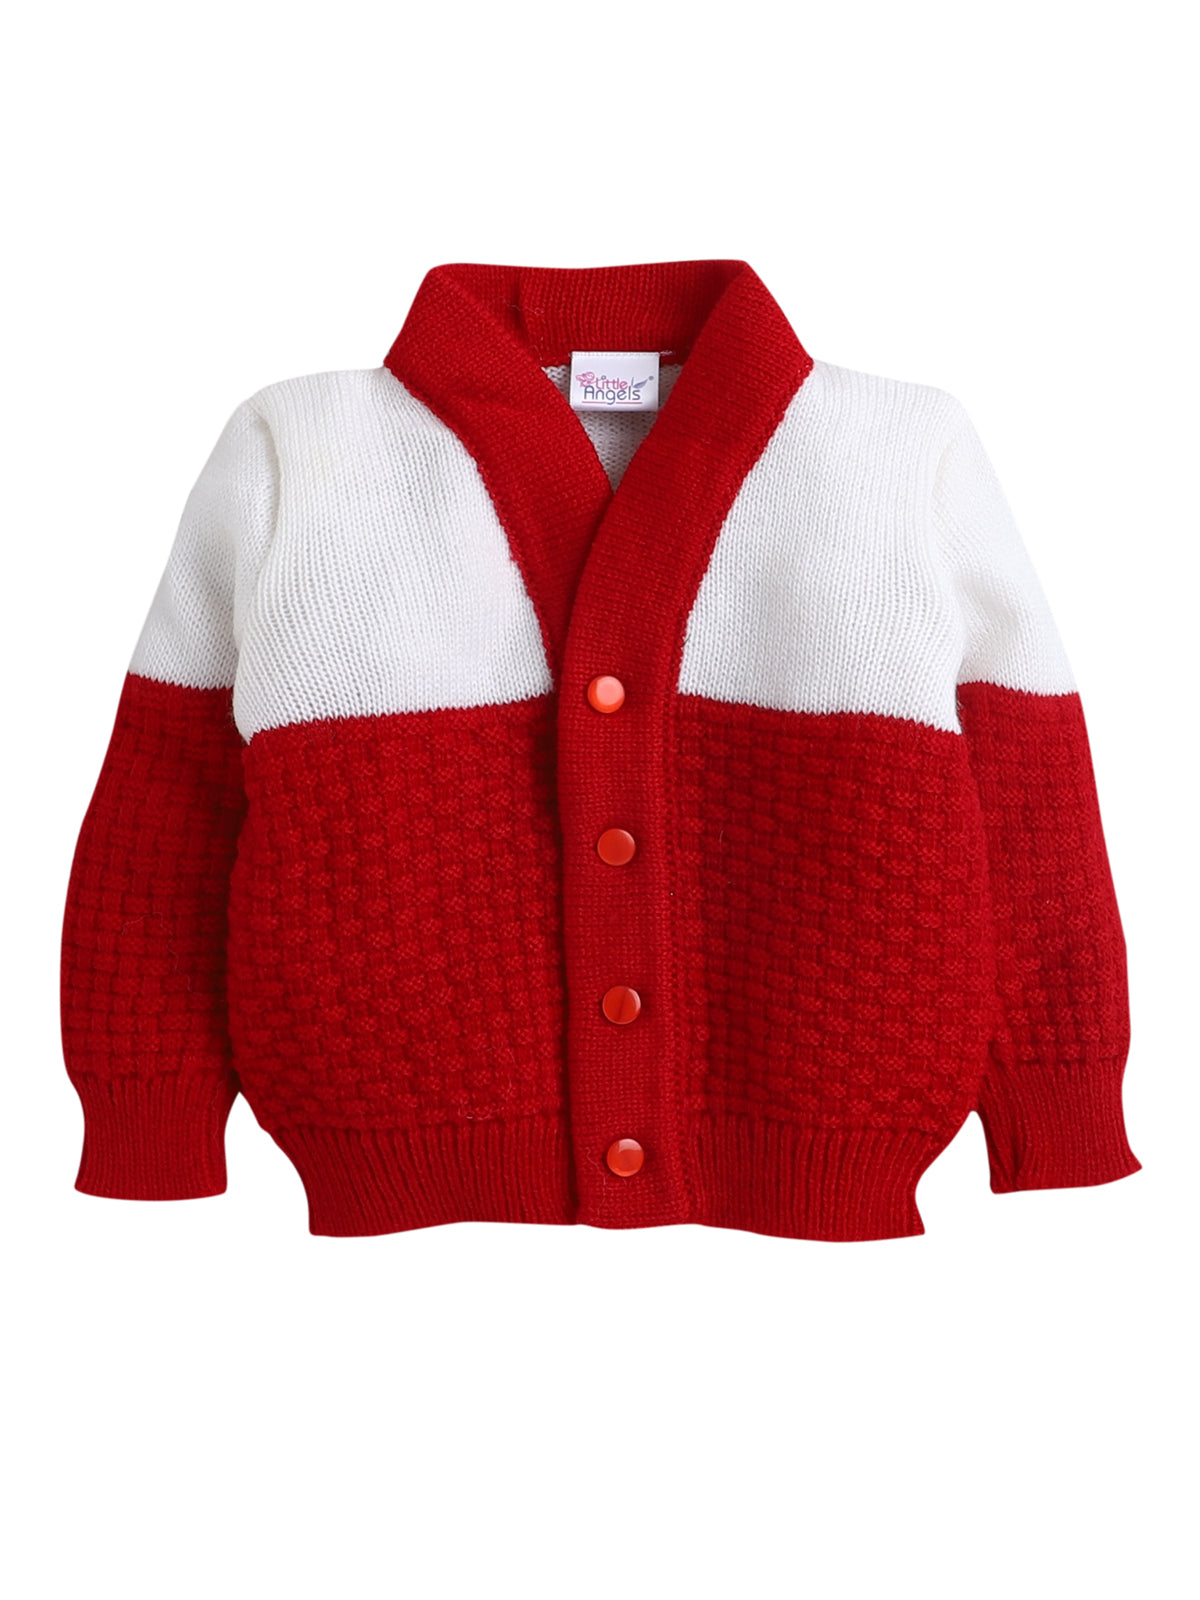 Cozy and Adorable Baby Sweater Set